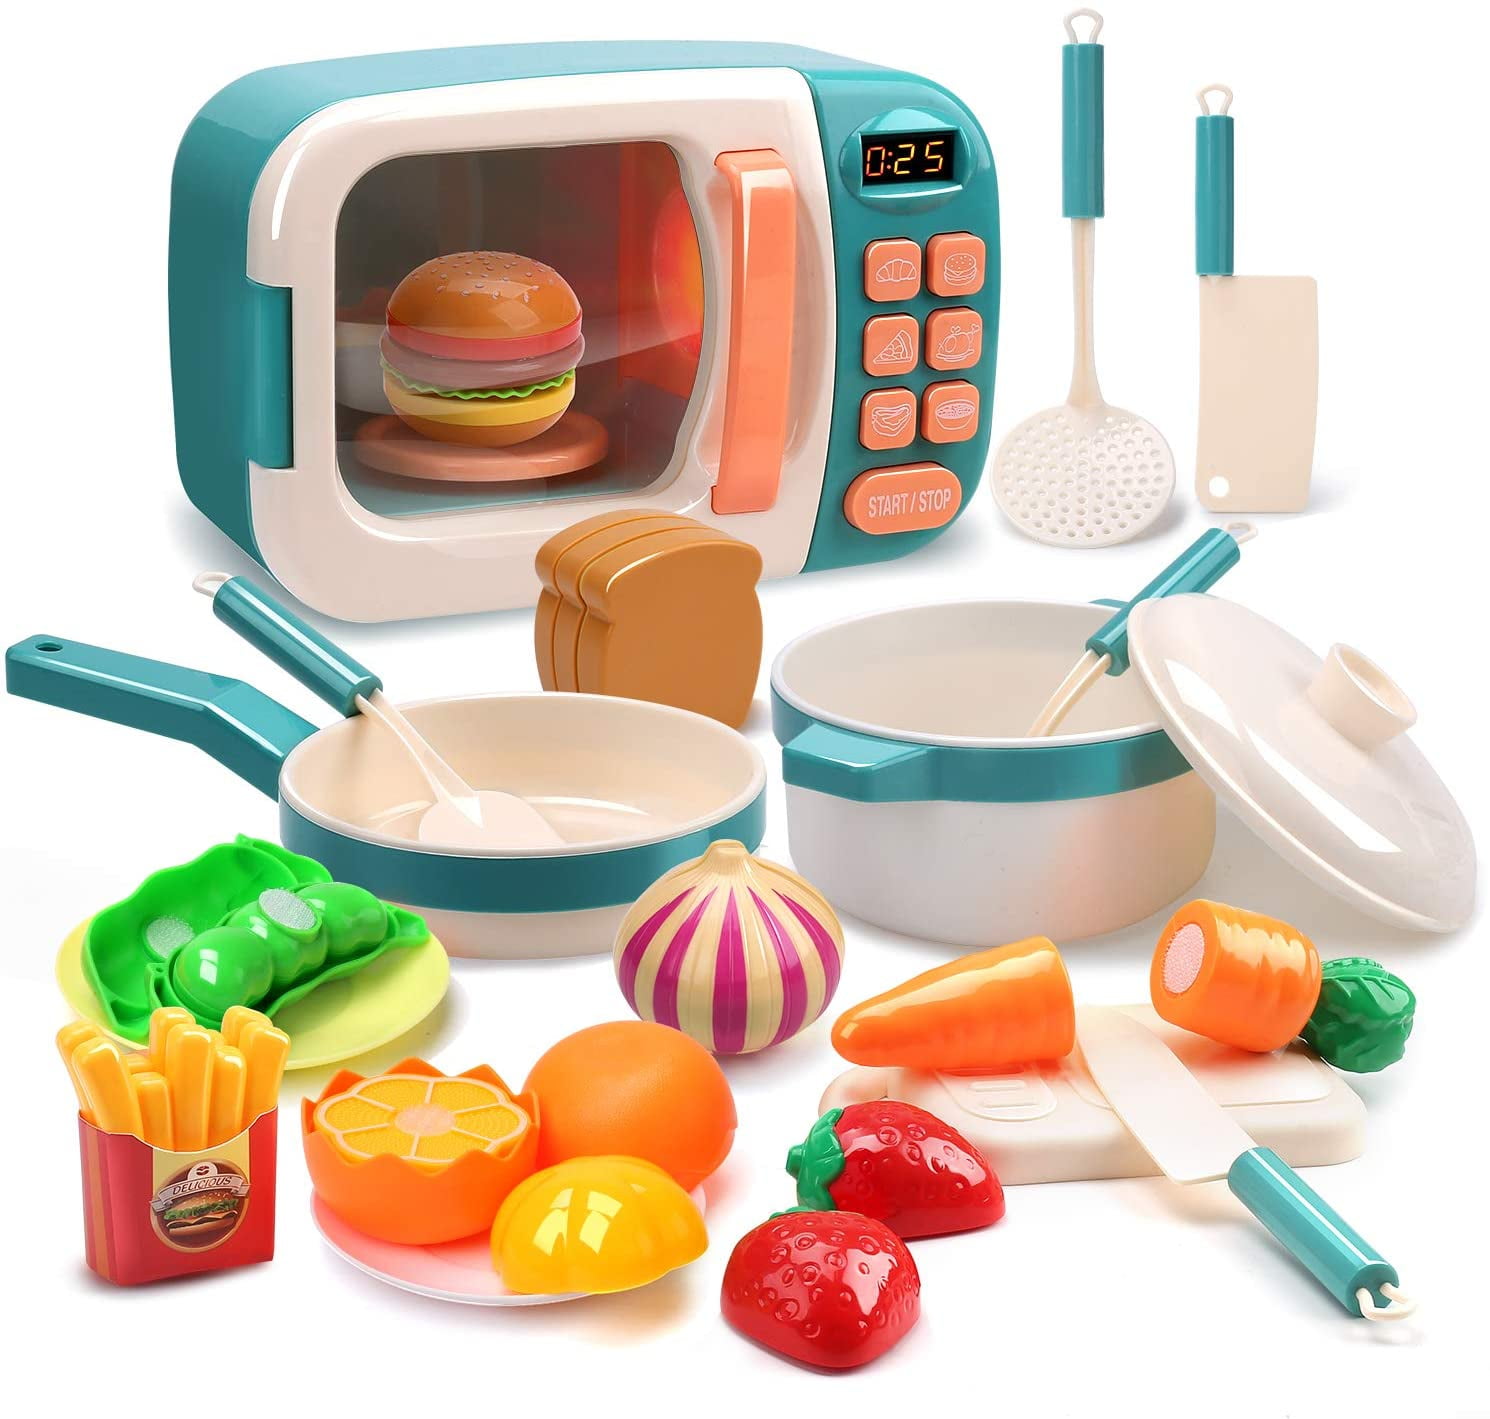 Kids Pretend Kitchen Play Set Toy Food Cooking Toddler Xmas Playset Toys Gifts 